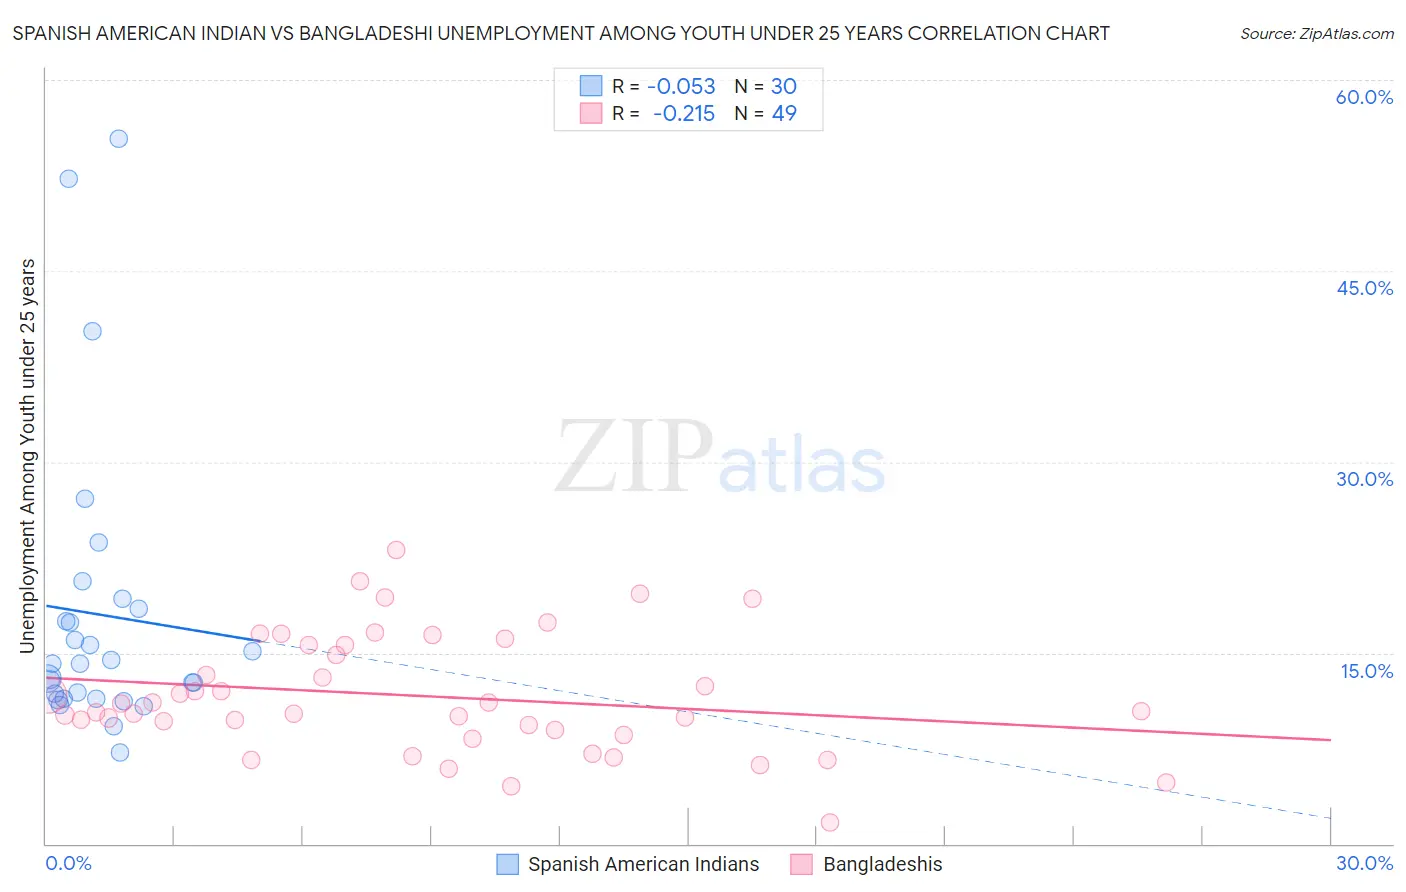 Spanish American Indian vs Bangladeshi Unemployment Among Youth under 25 years